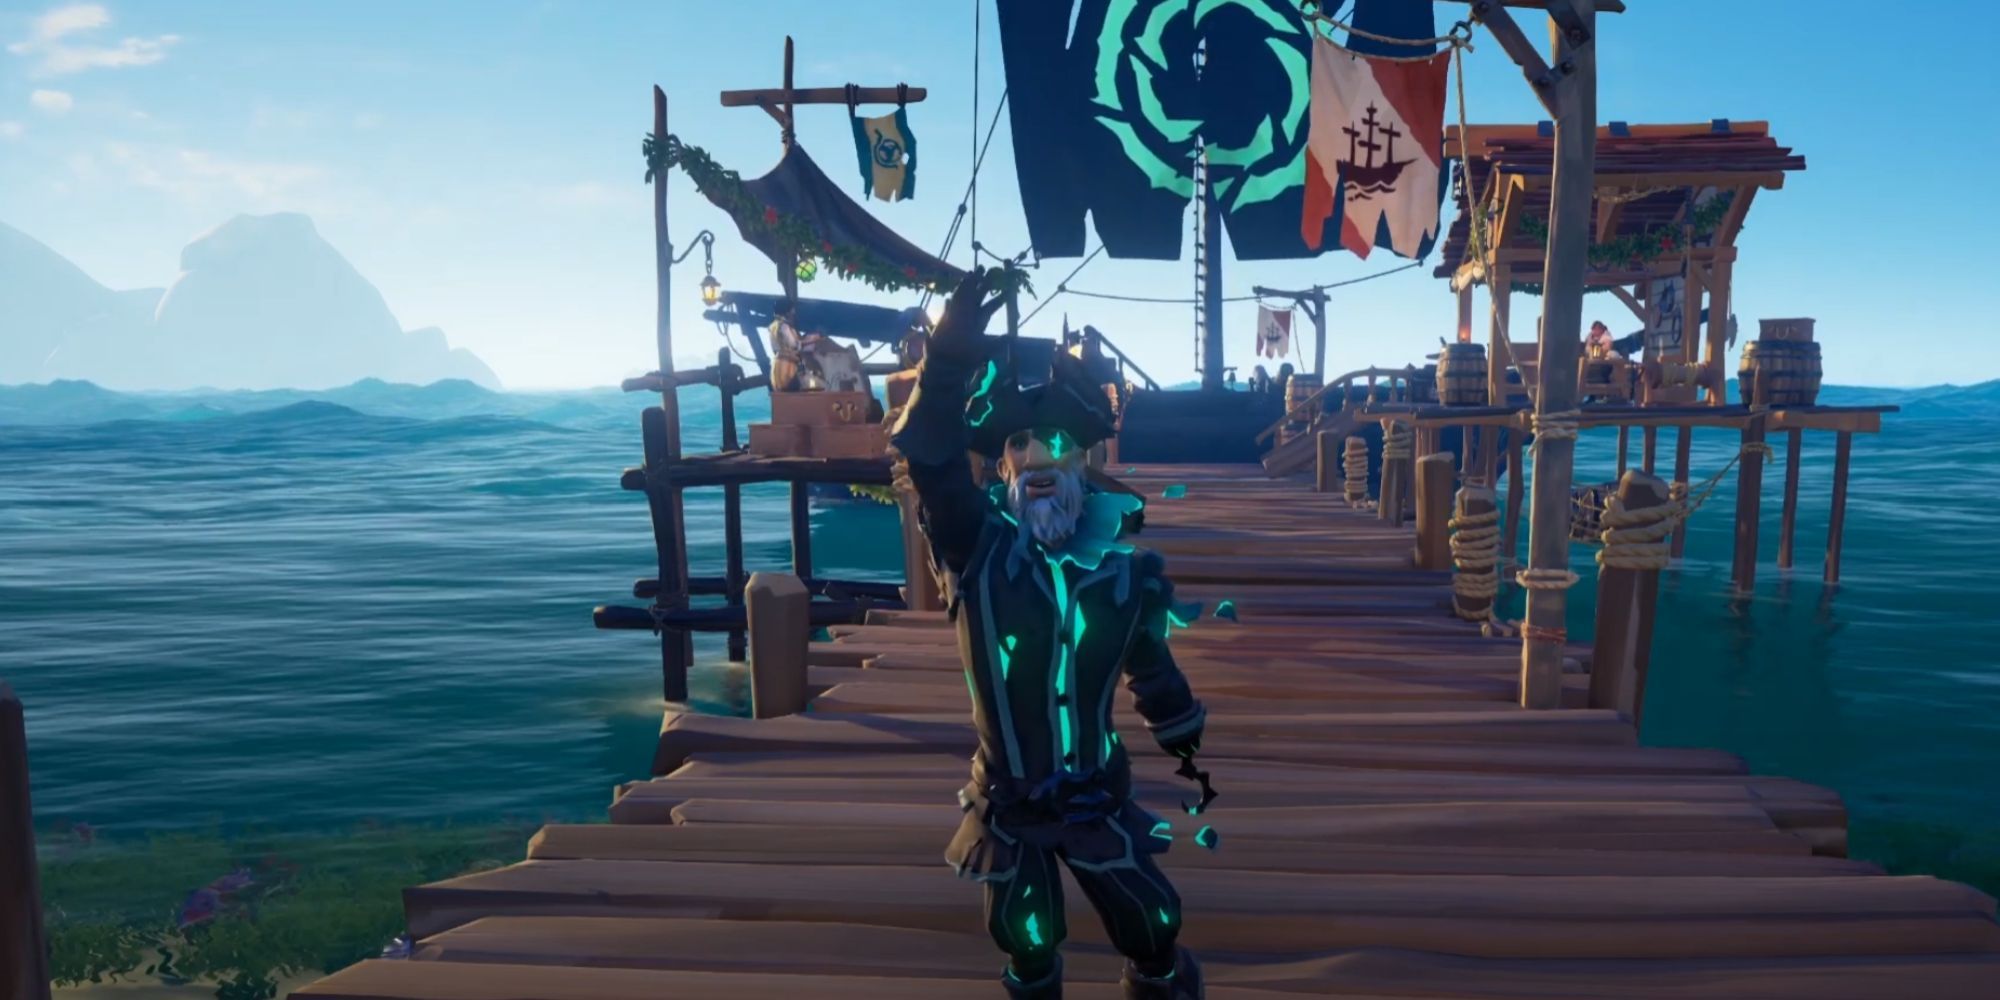 sea of thieves character wearing the ghost outfi at an outpost